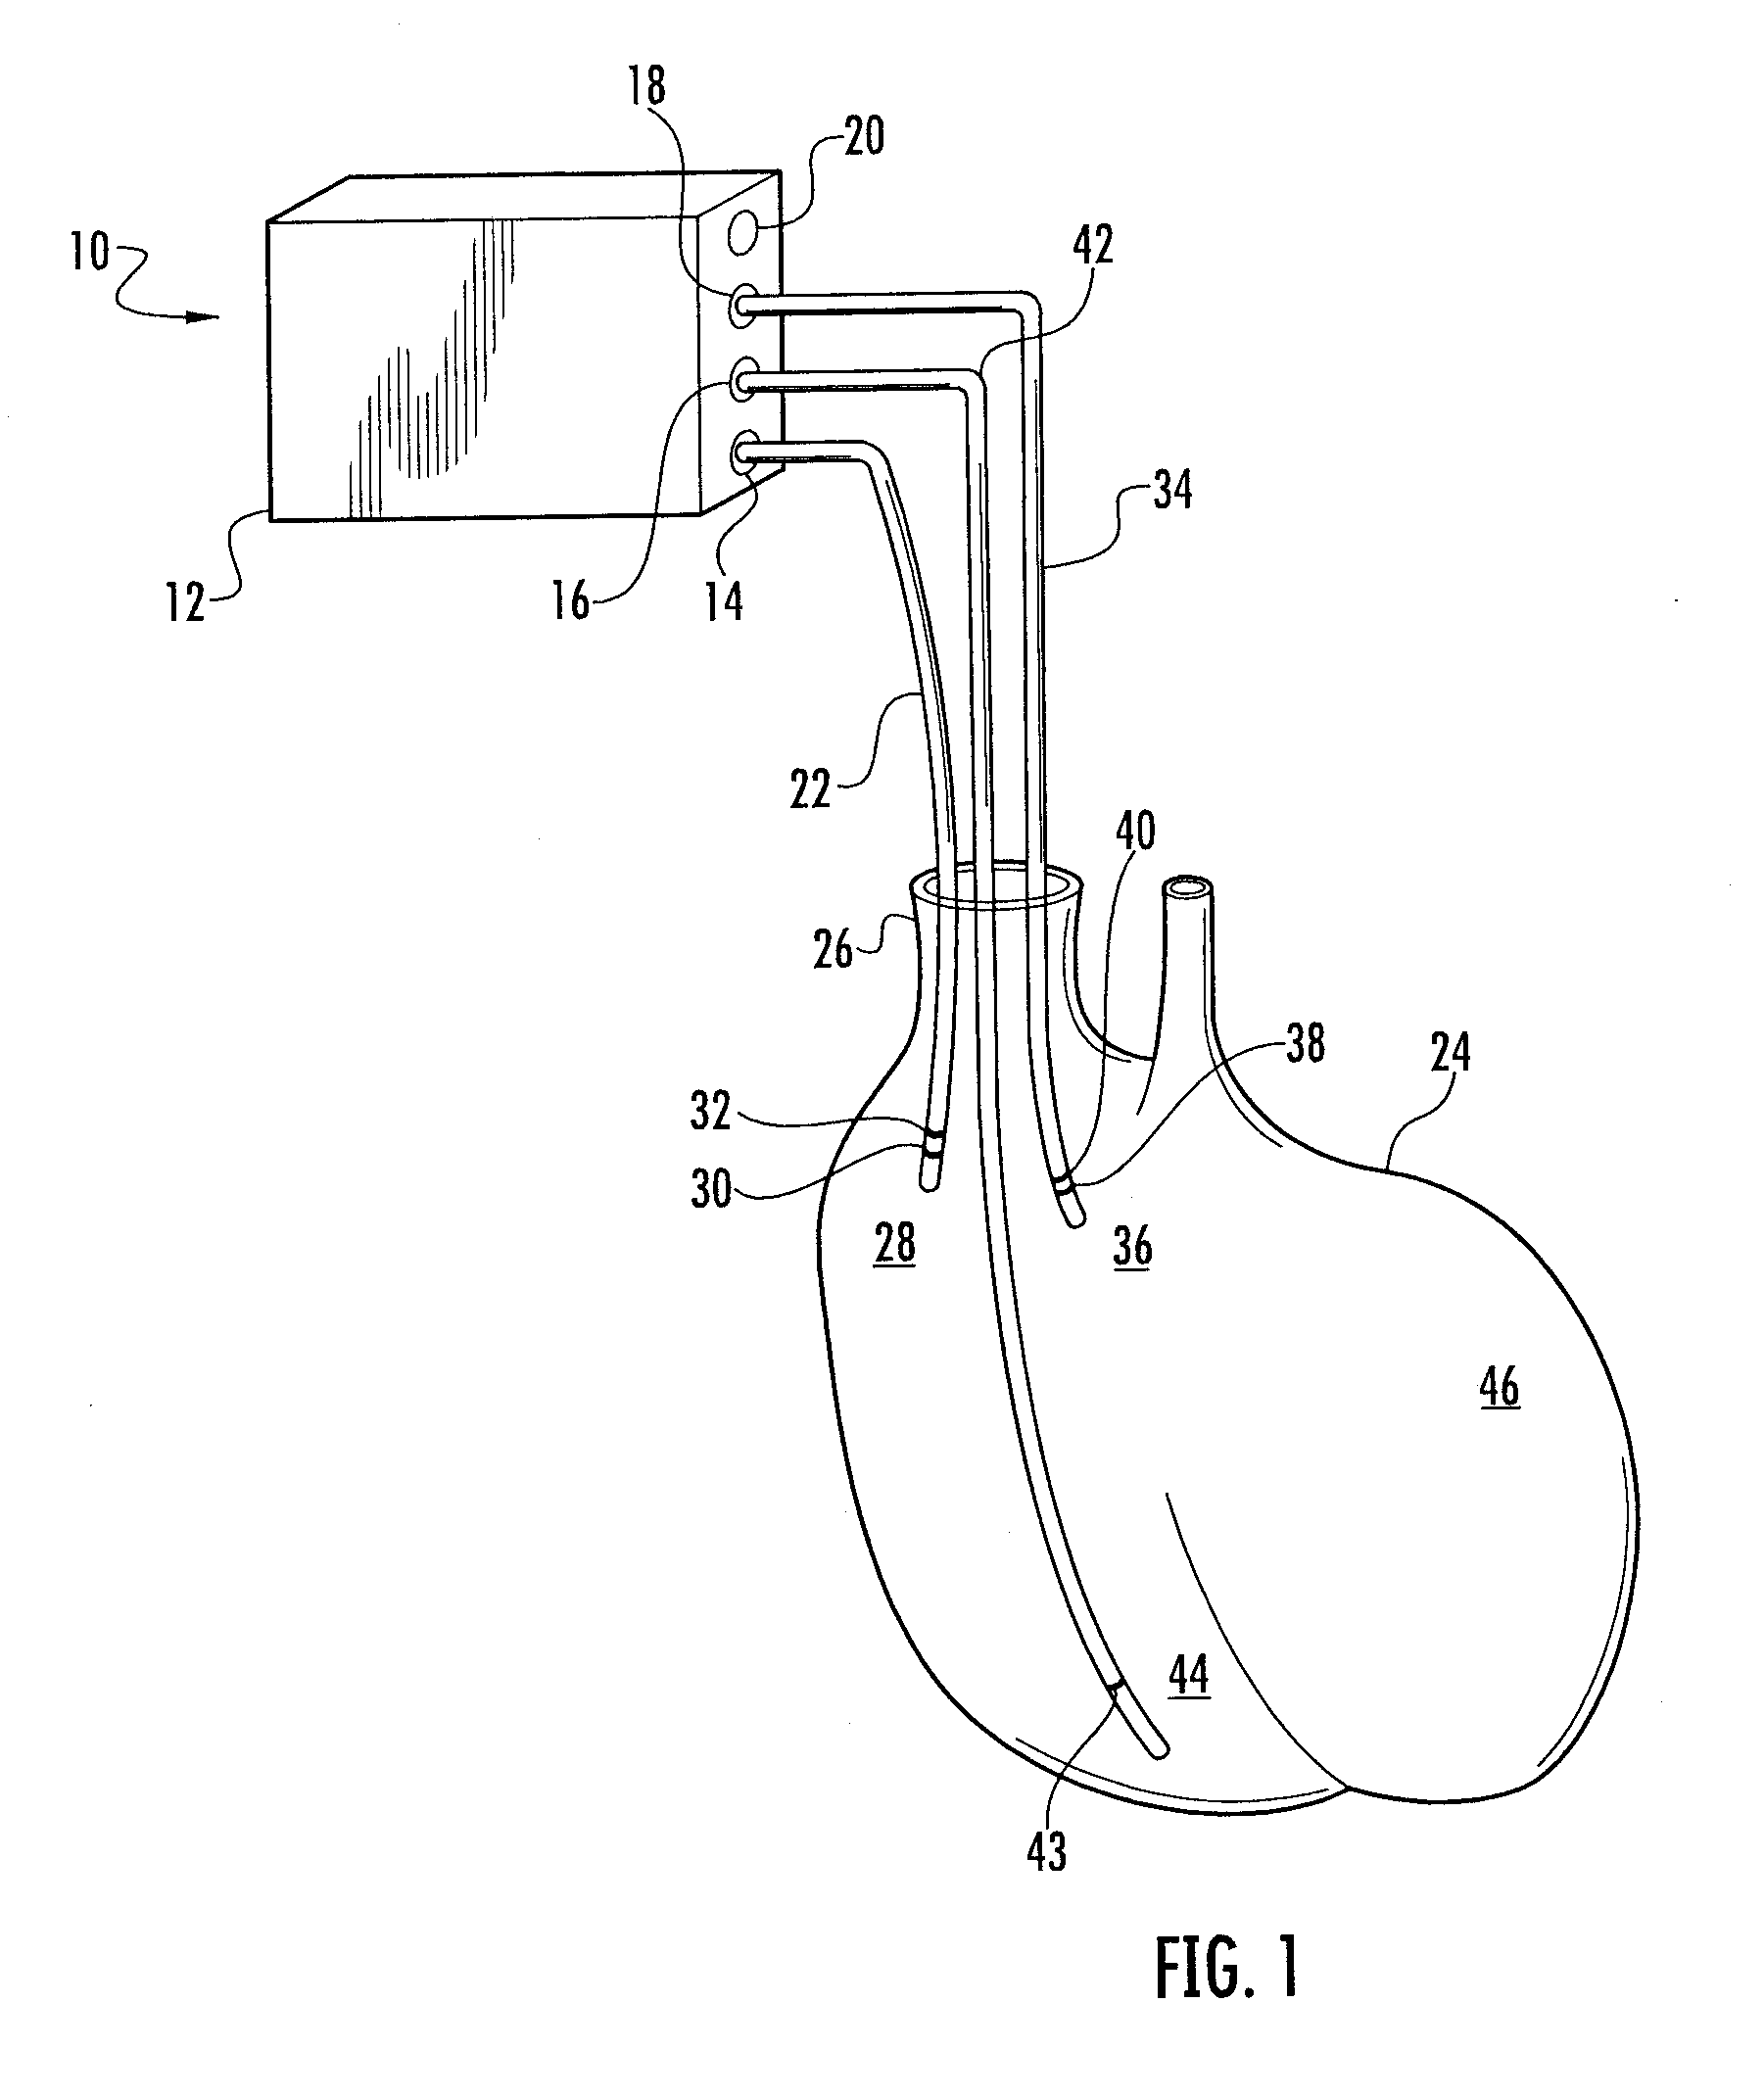 Device And Method For Peri-Hisian Pacing And/Or Simultaneous Bi-Ventricular or Tri-Ventricular Pacing For Cardiac Resynchronization